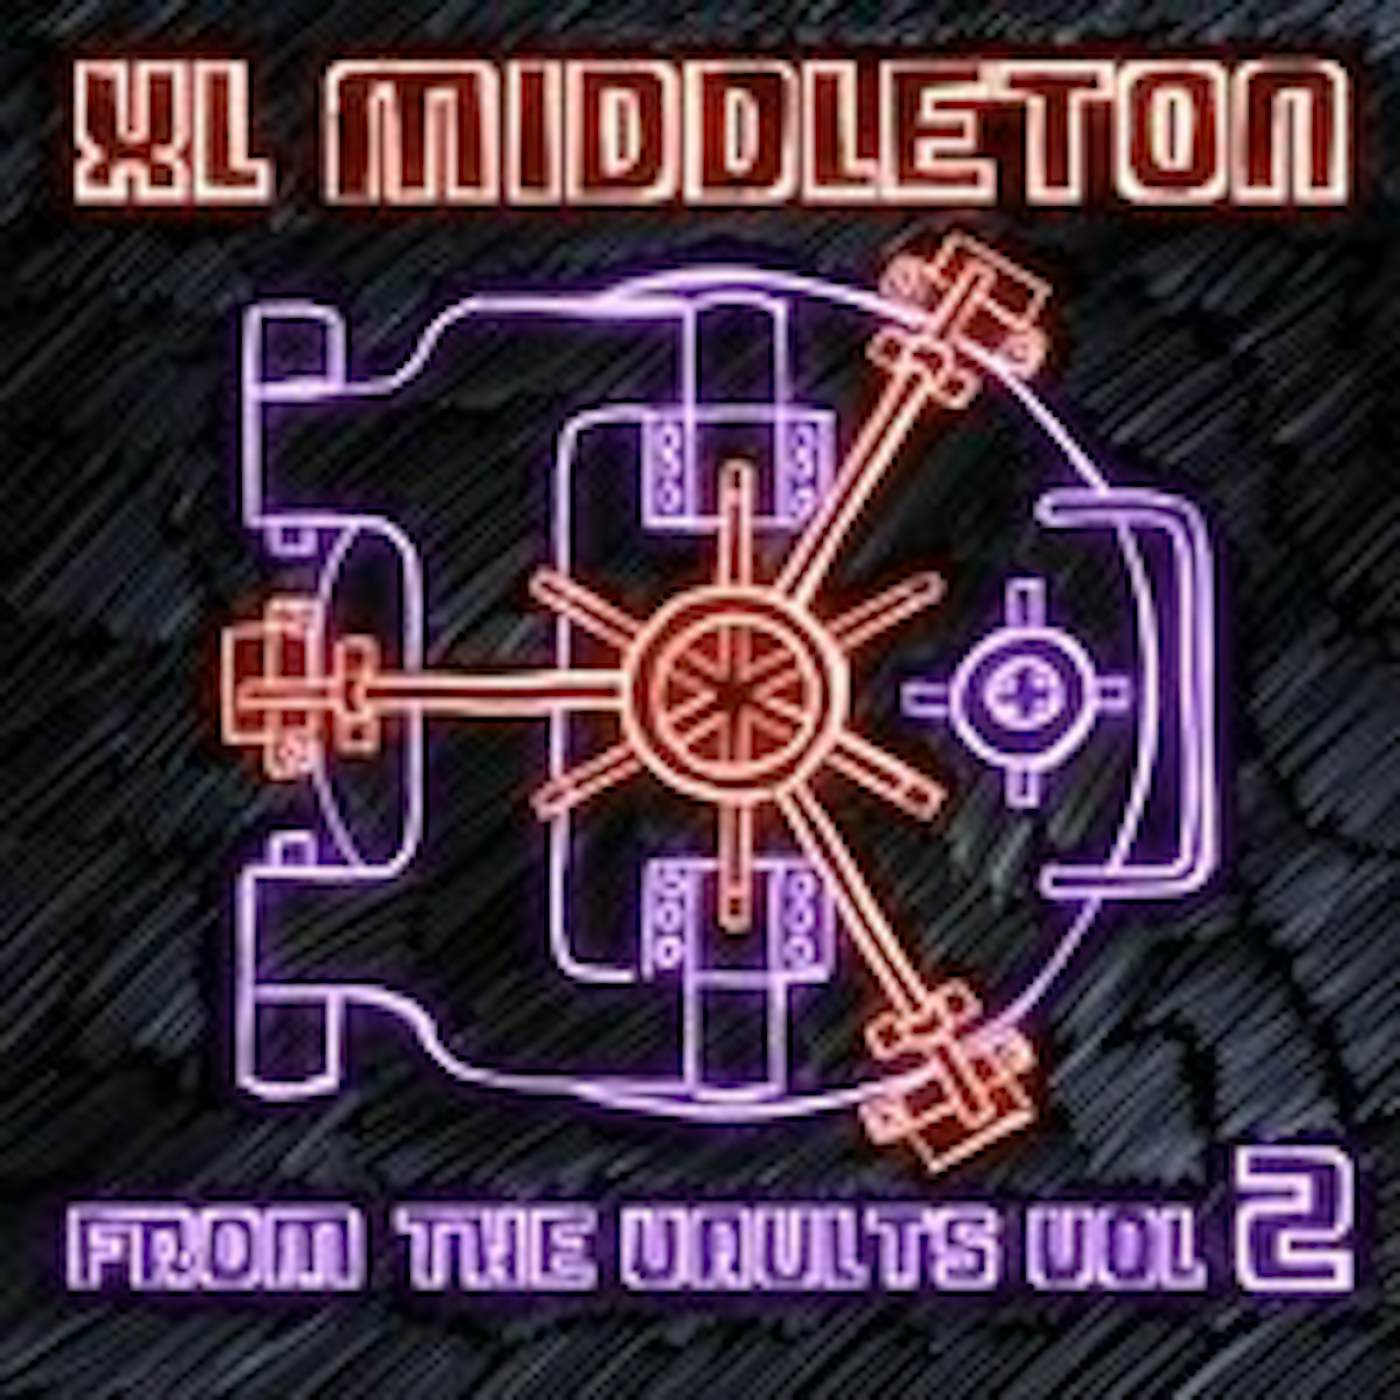 XL Middleton FROM THE VAULTS VOL. 2 CD